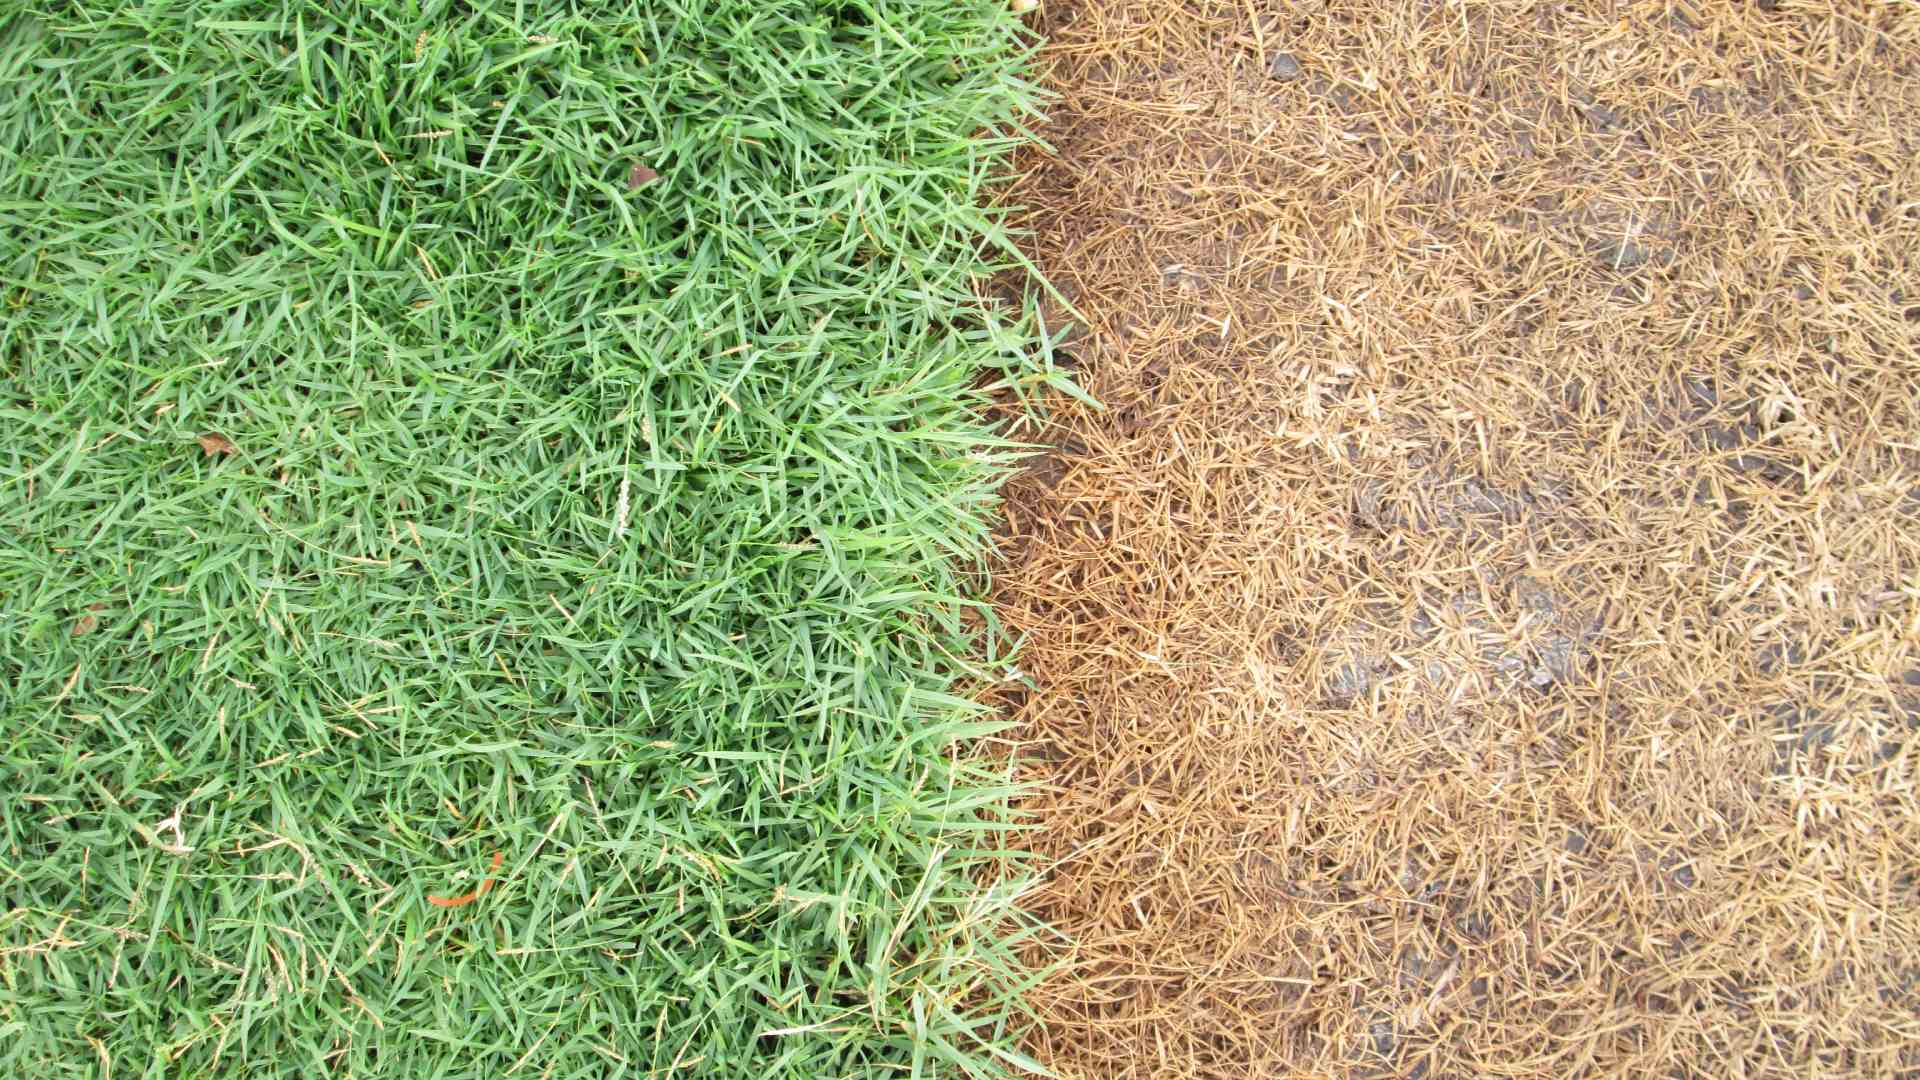 Fertilization & Weed Control: One Without the Other Is a Waste of Money!